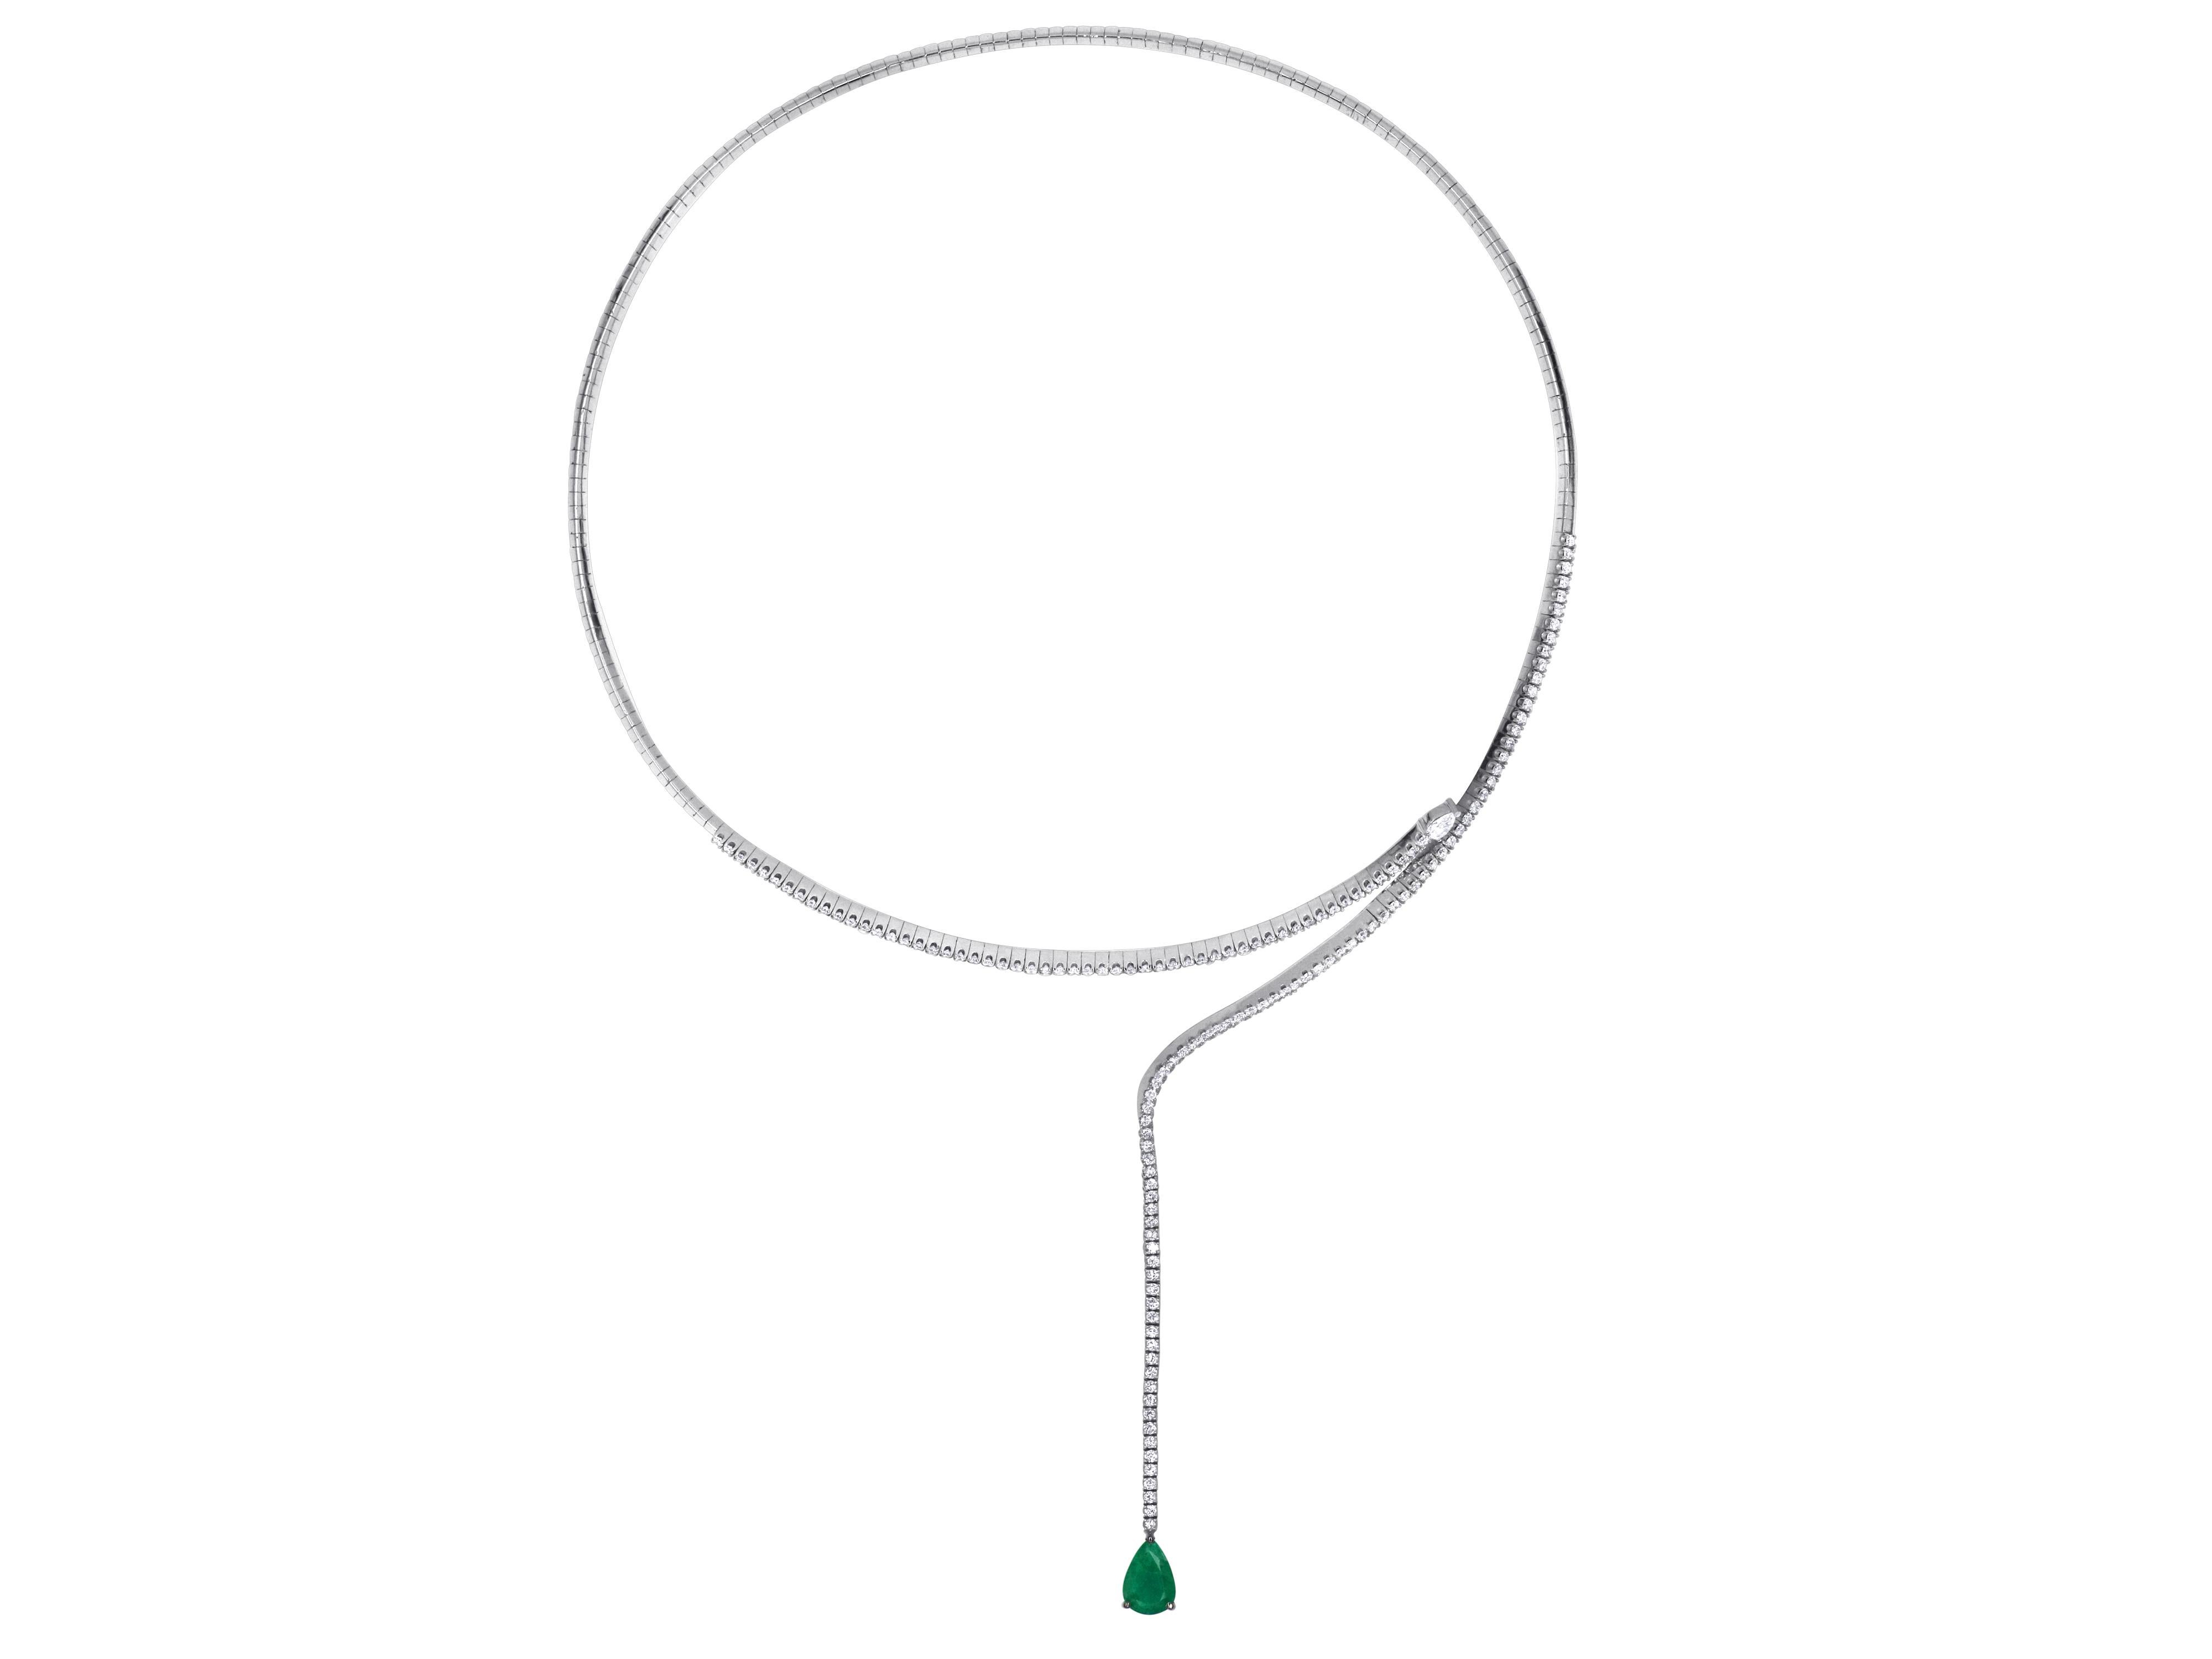 Flexible necklace in 18k white gold with 1.30 carats pear cut emerald and 1.87 carats brilliant cut diamonds. 